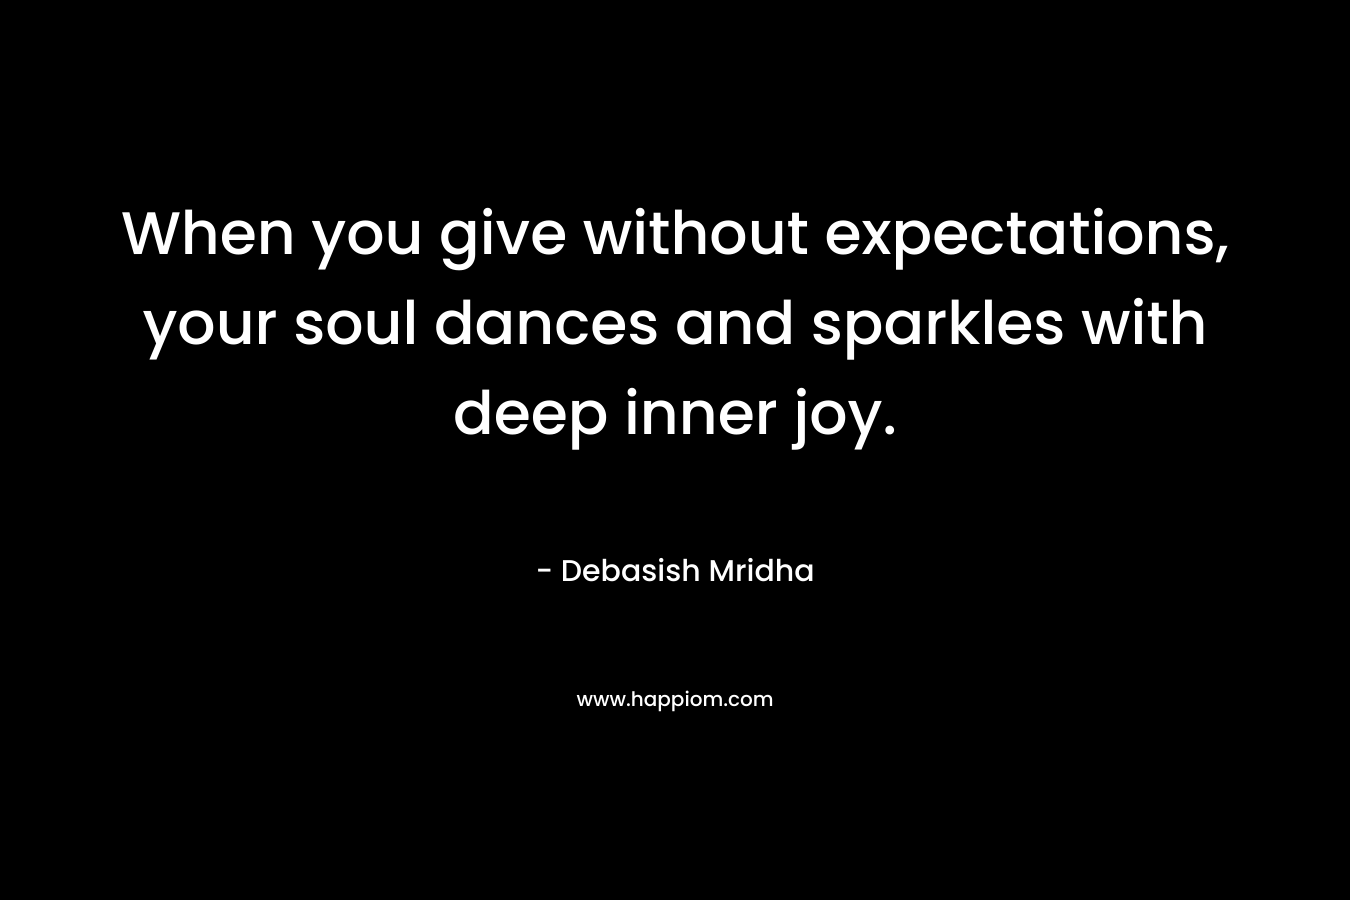 When you give without expectations, your soul dances and sparkles with deep inner joy.